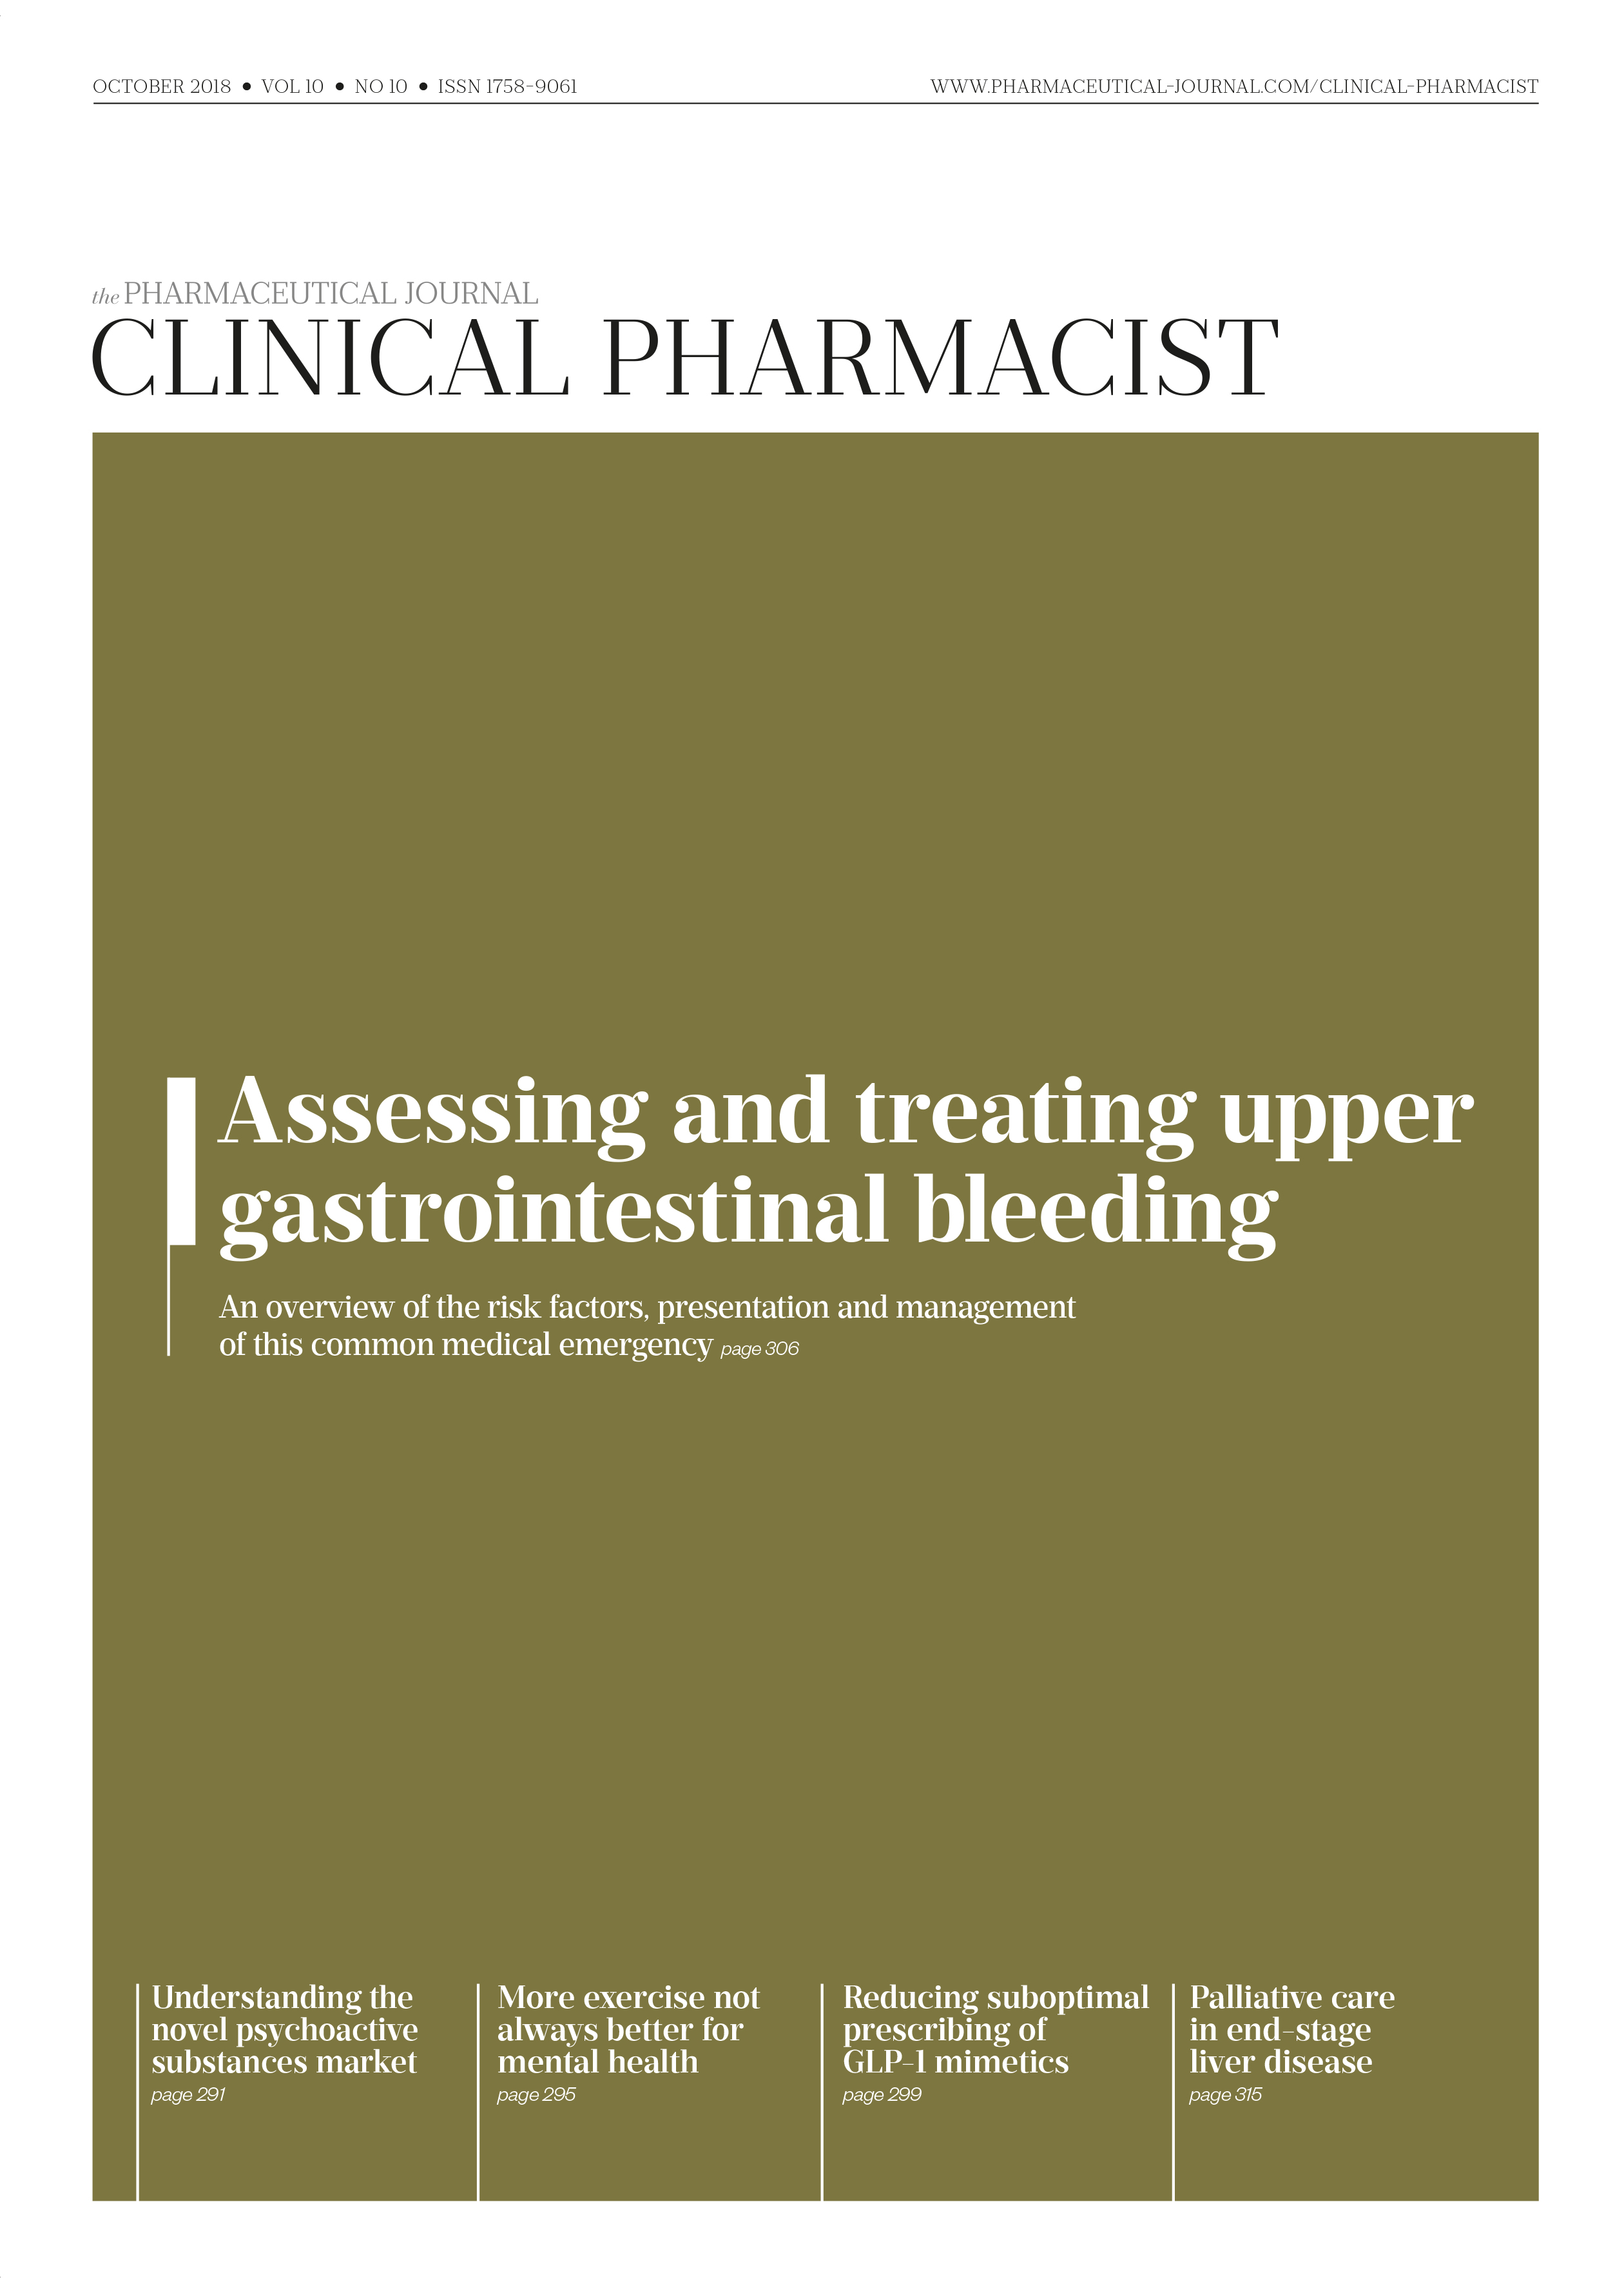 Publication issue cover for CP, October 2018, Vol 10, No 10